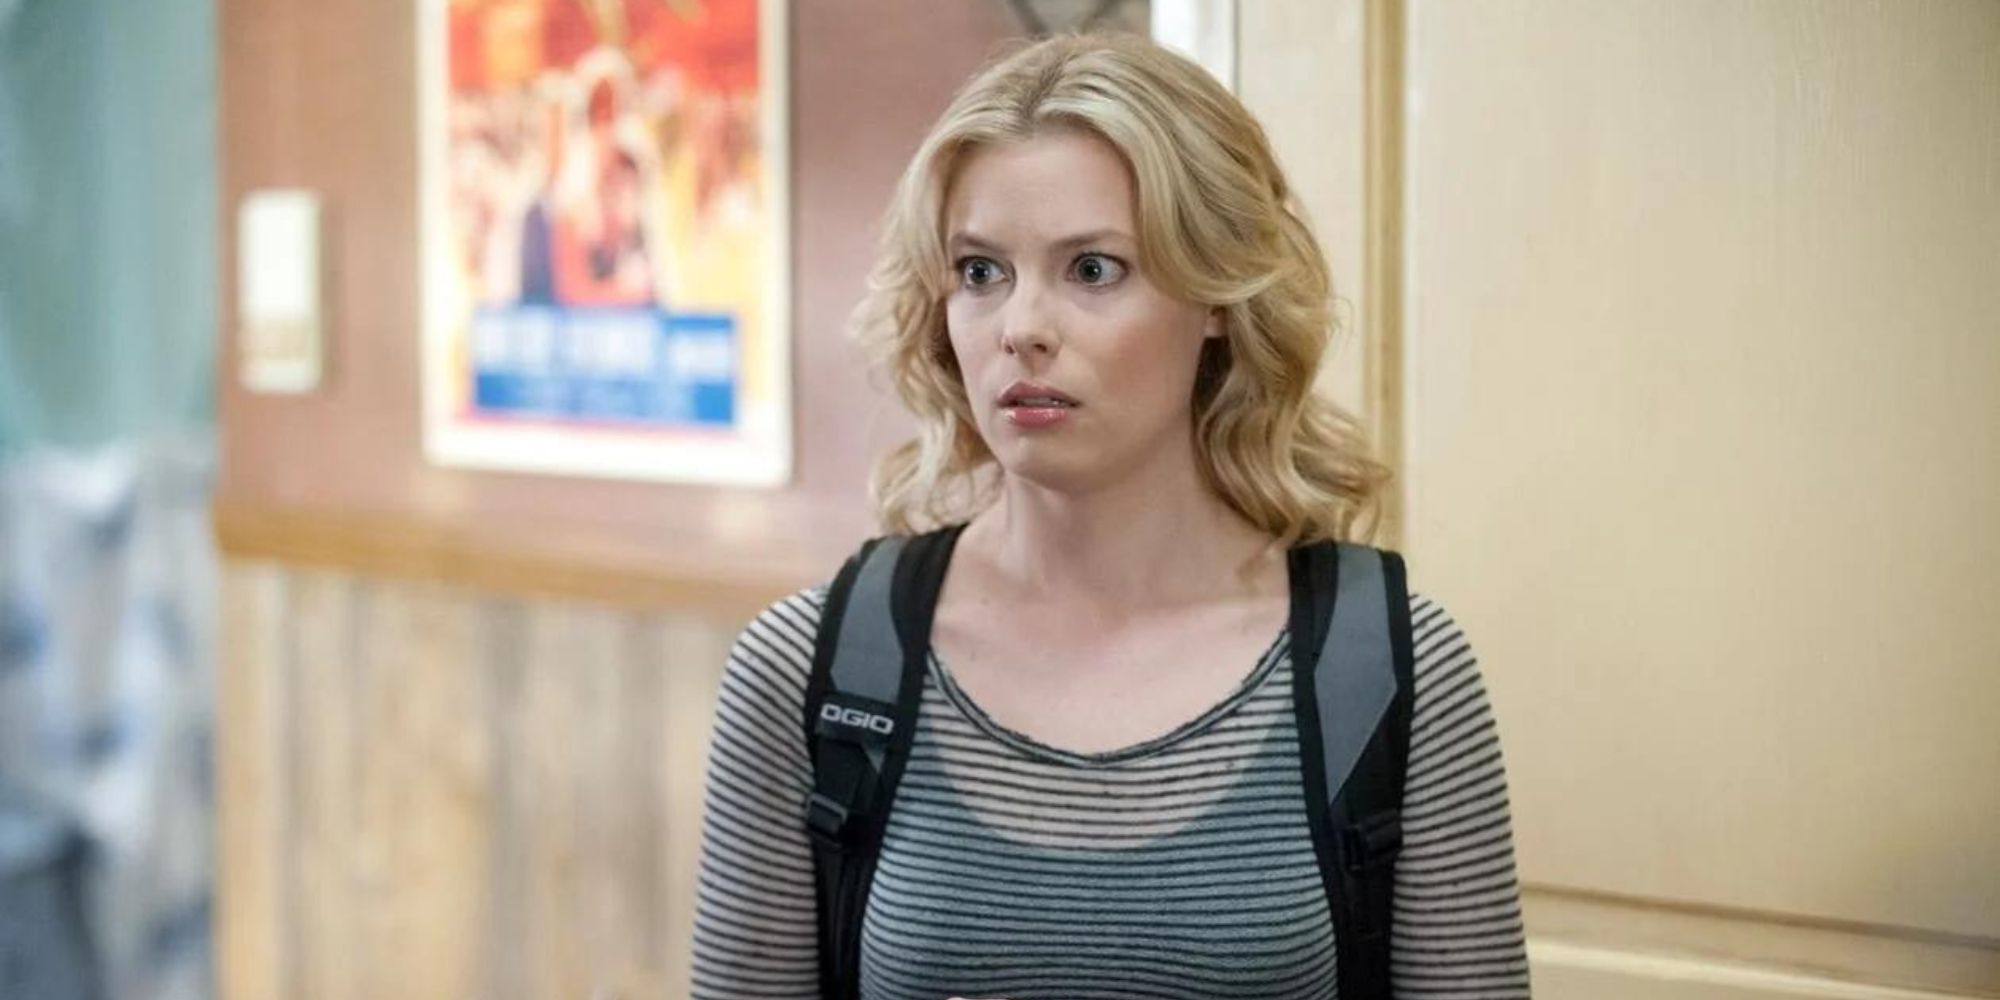 Britta Perry (Gillian Jacobs) from Community, standing and frowning